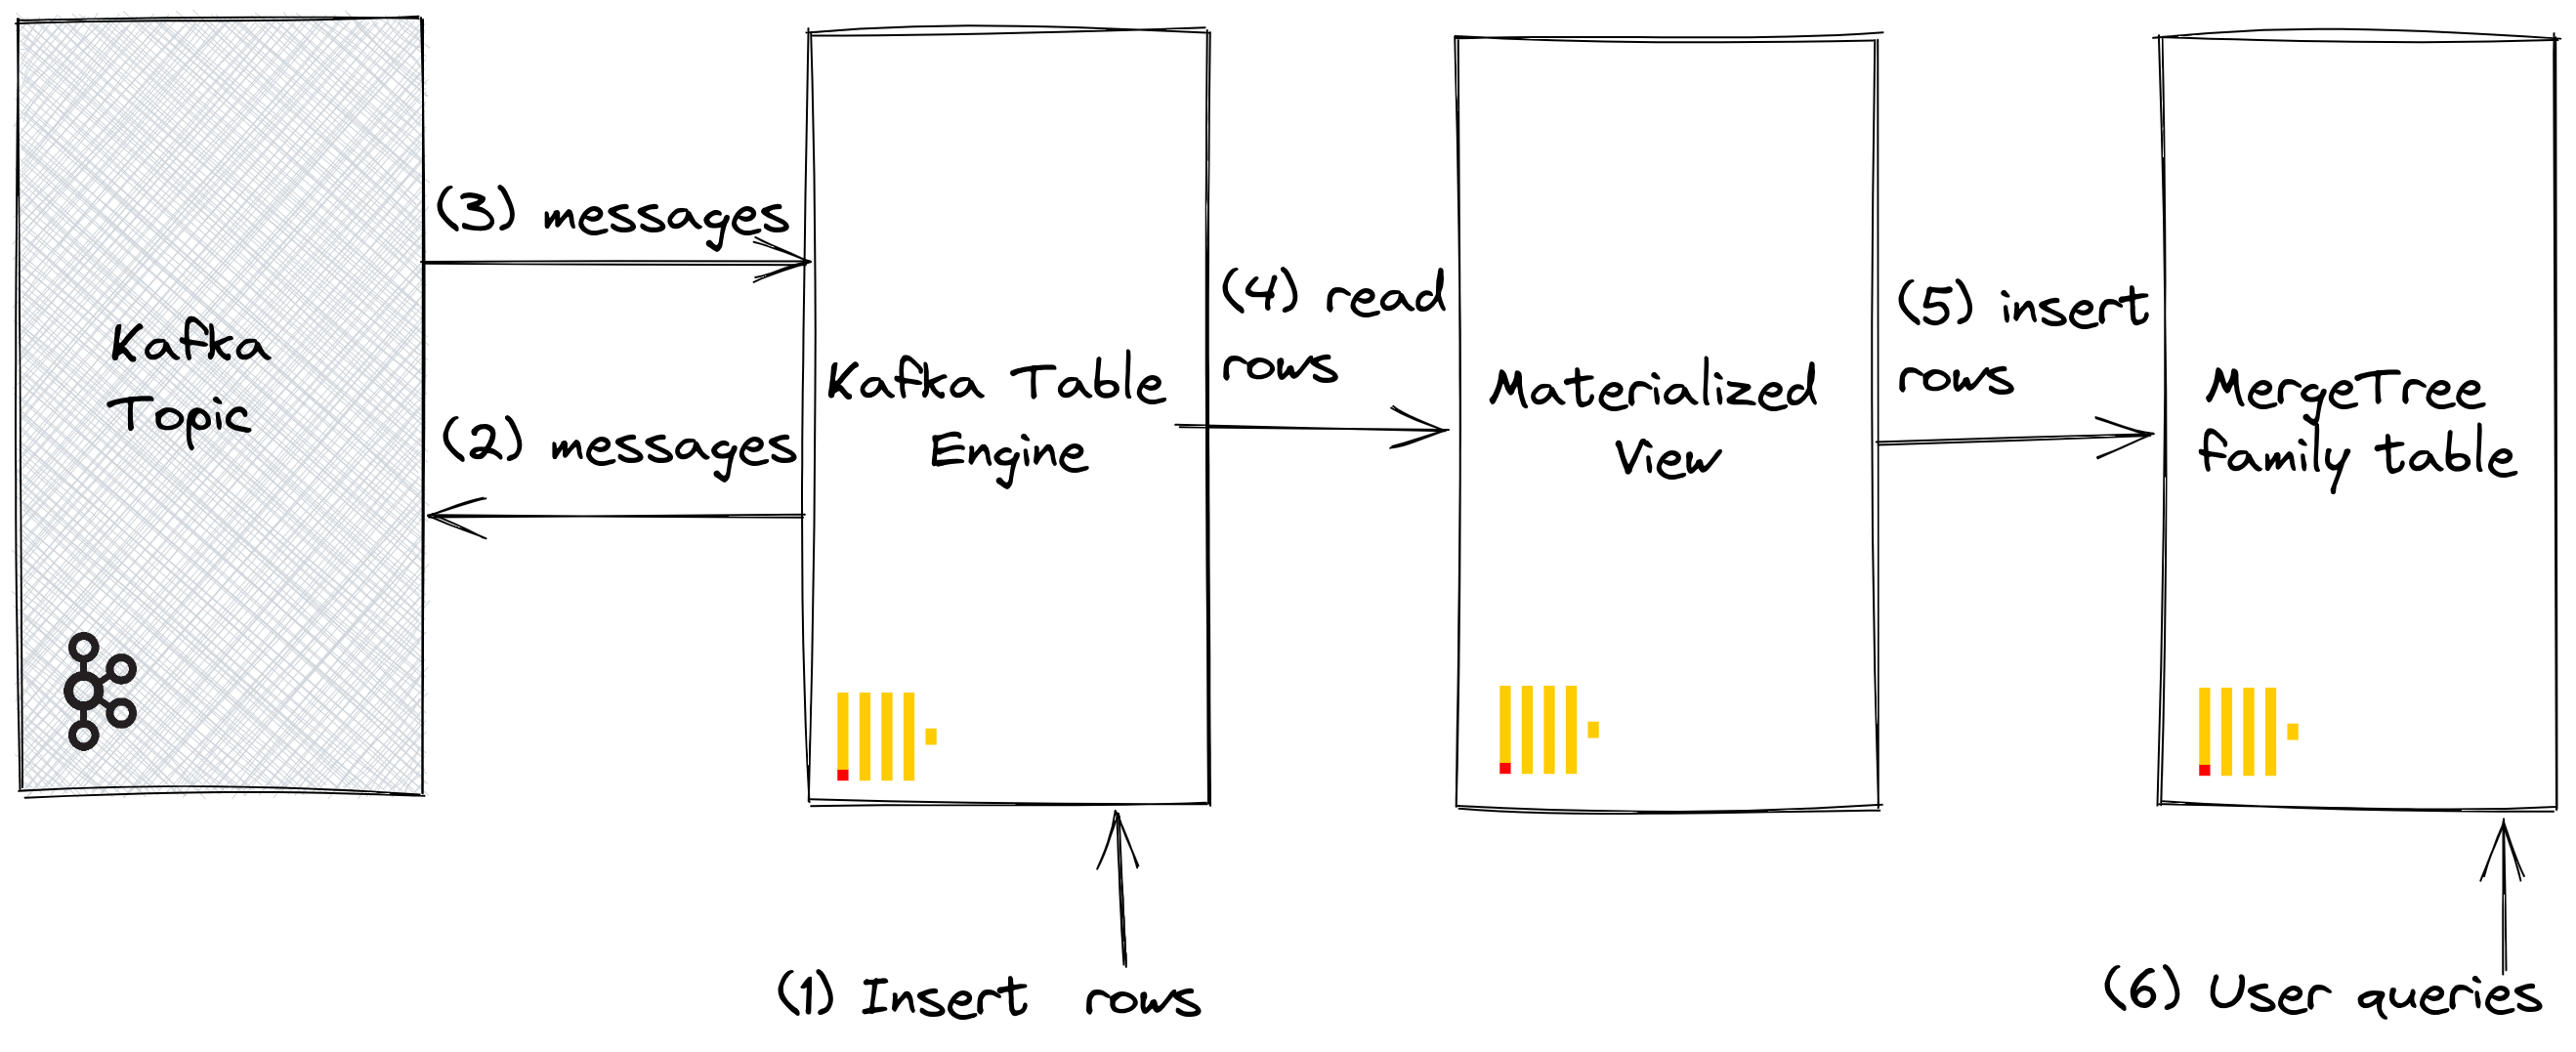 Kafka table engine with inserts